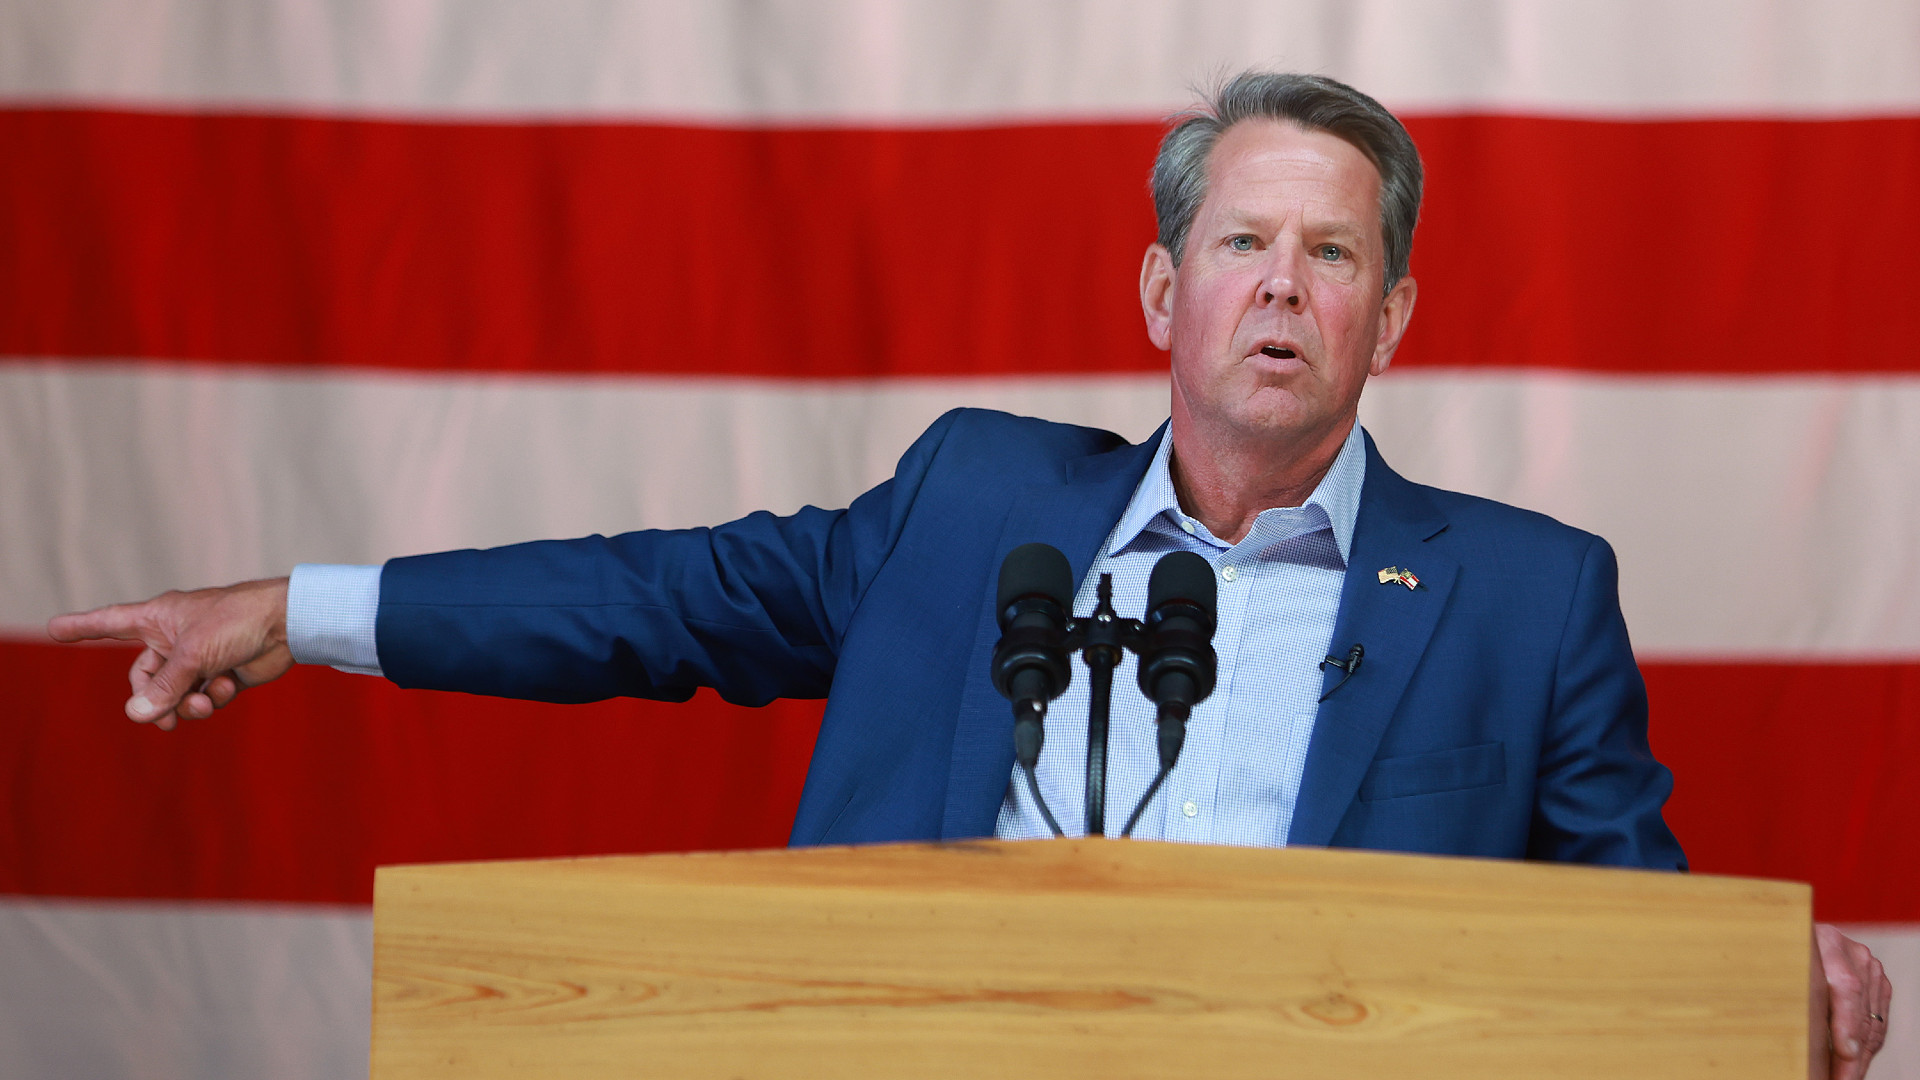 Georgia Gov. Brian Kemp speaks at a campaign event attended by former U.S. Vice President Mike Pence at the Cobb County International Airport on May 23, 2022 in Kennesaw, Georgia. Kemp is running for reelection against former U.S. Sen. David Perdue in tomorrow's Republican gubernatorial primary.